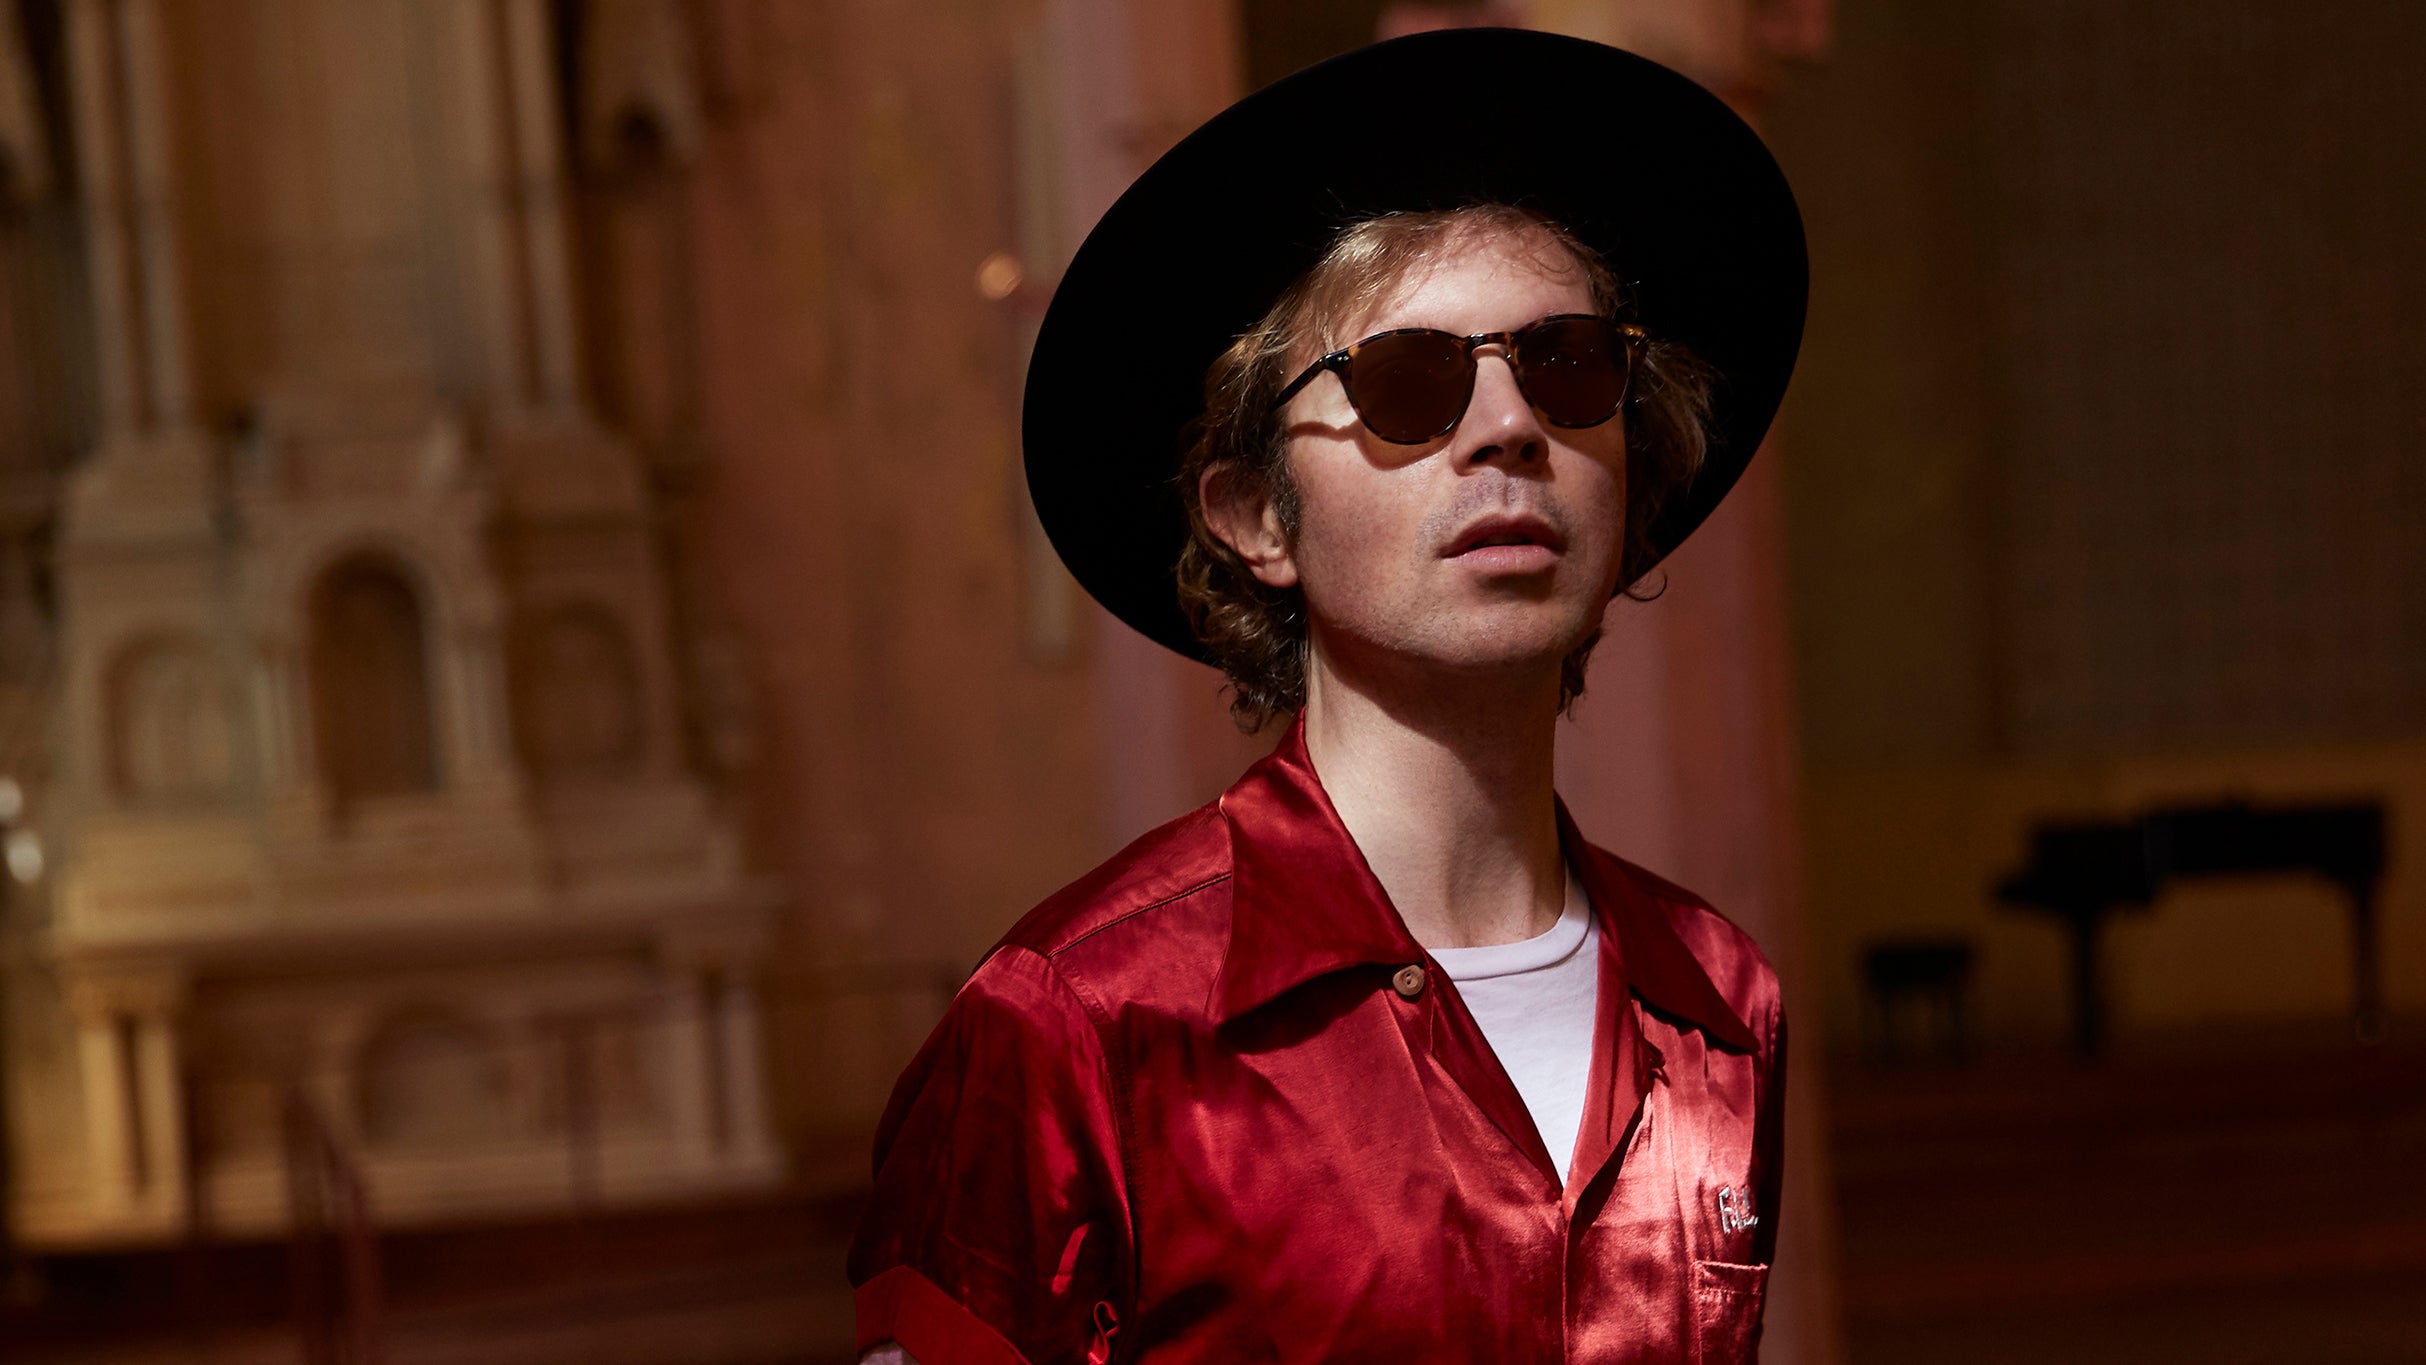 Beck & Phoenix: Summer Odyssey free presale password for early tickets in Seattle